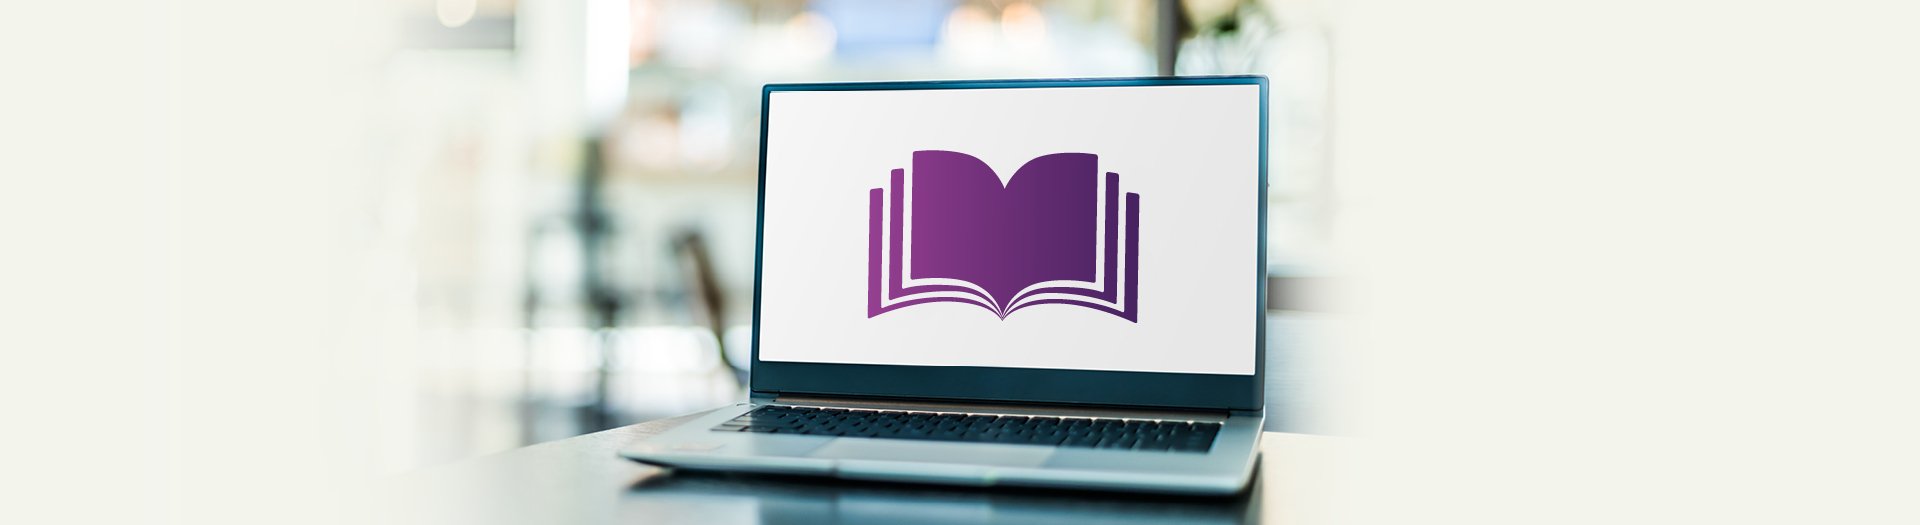 Image of a stylised open purple book on a laptop computer screen